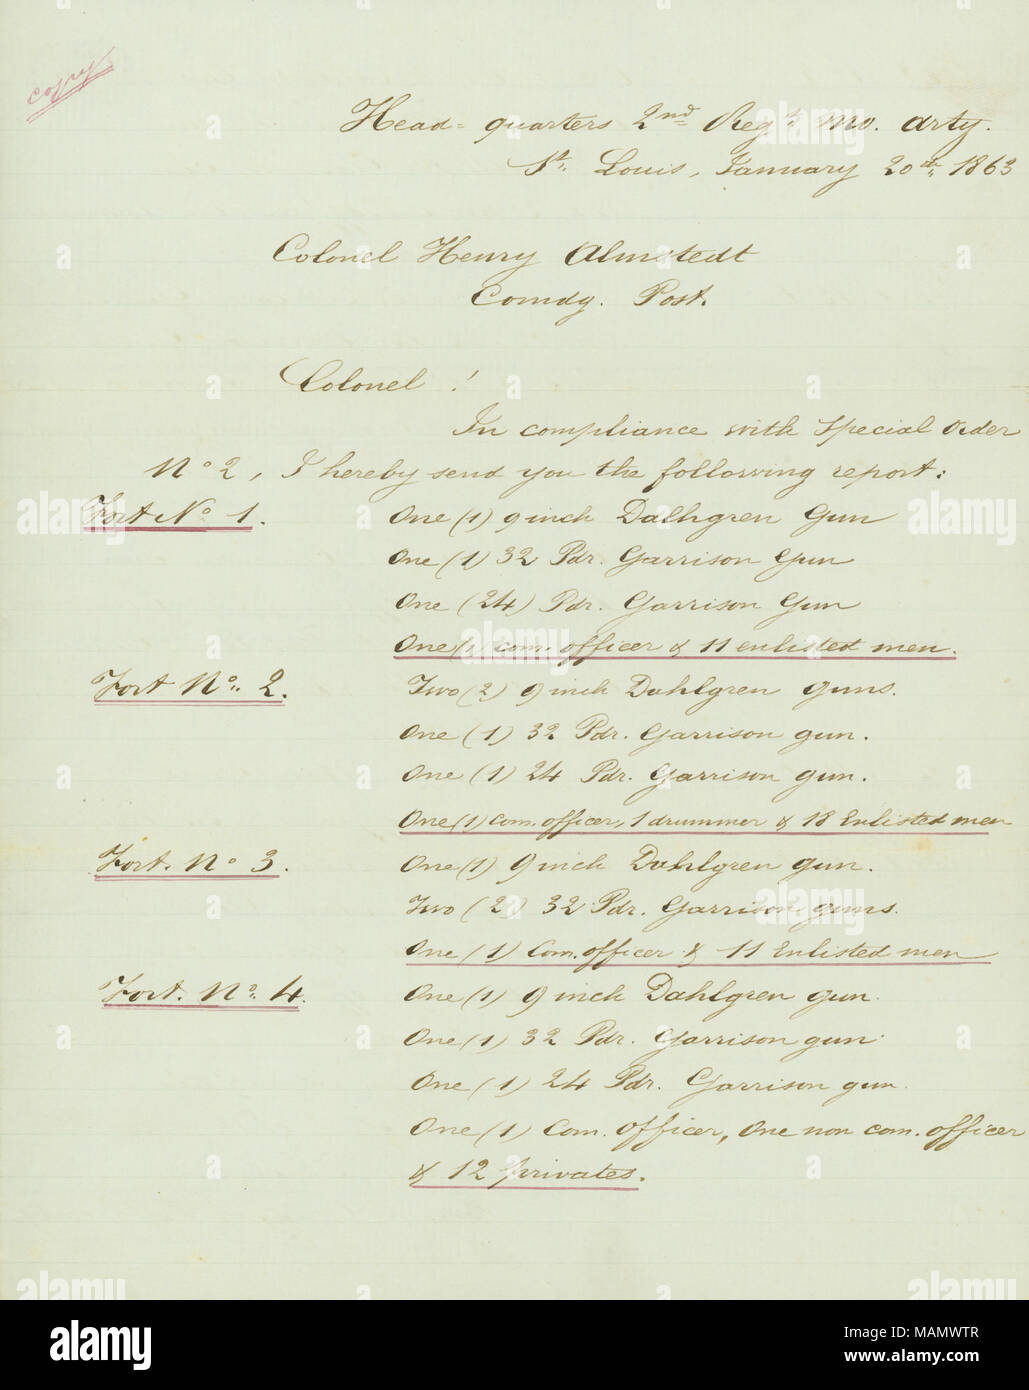 States, 'In compliance with Special Order No. 2, I send you reports of Forts 1 to 9.' Title: Contemporary copy of letter signed D. Urban, Head quarters 2nd Reg't Mo. Arty. [2nd Regiment Missouri Artillery], St. Louis, to Colonel Henry Almstedt, Comdg. Post, January 20, 1863  . 20 January 1863. Urban, D. Stock Photo